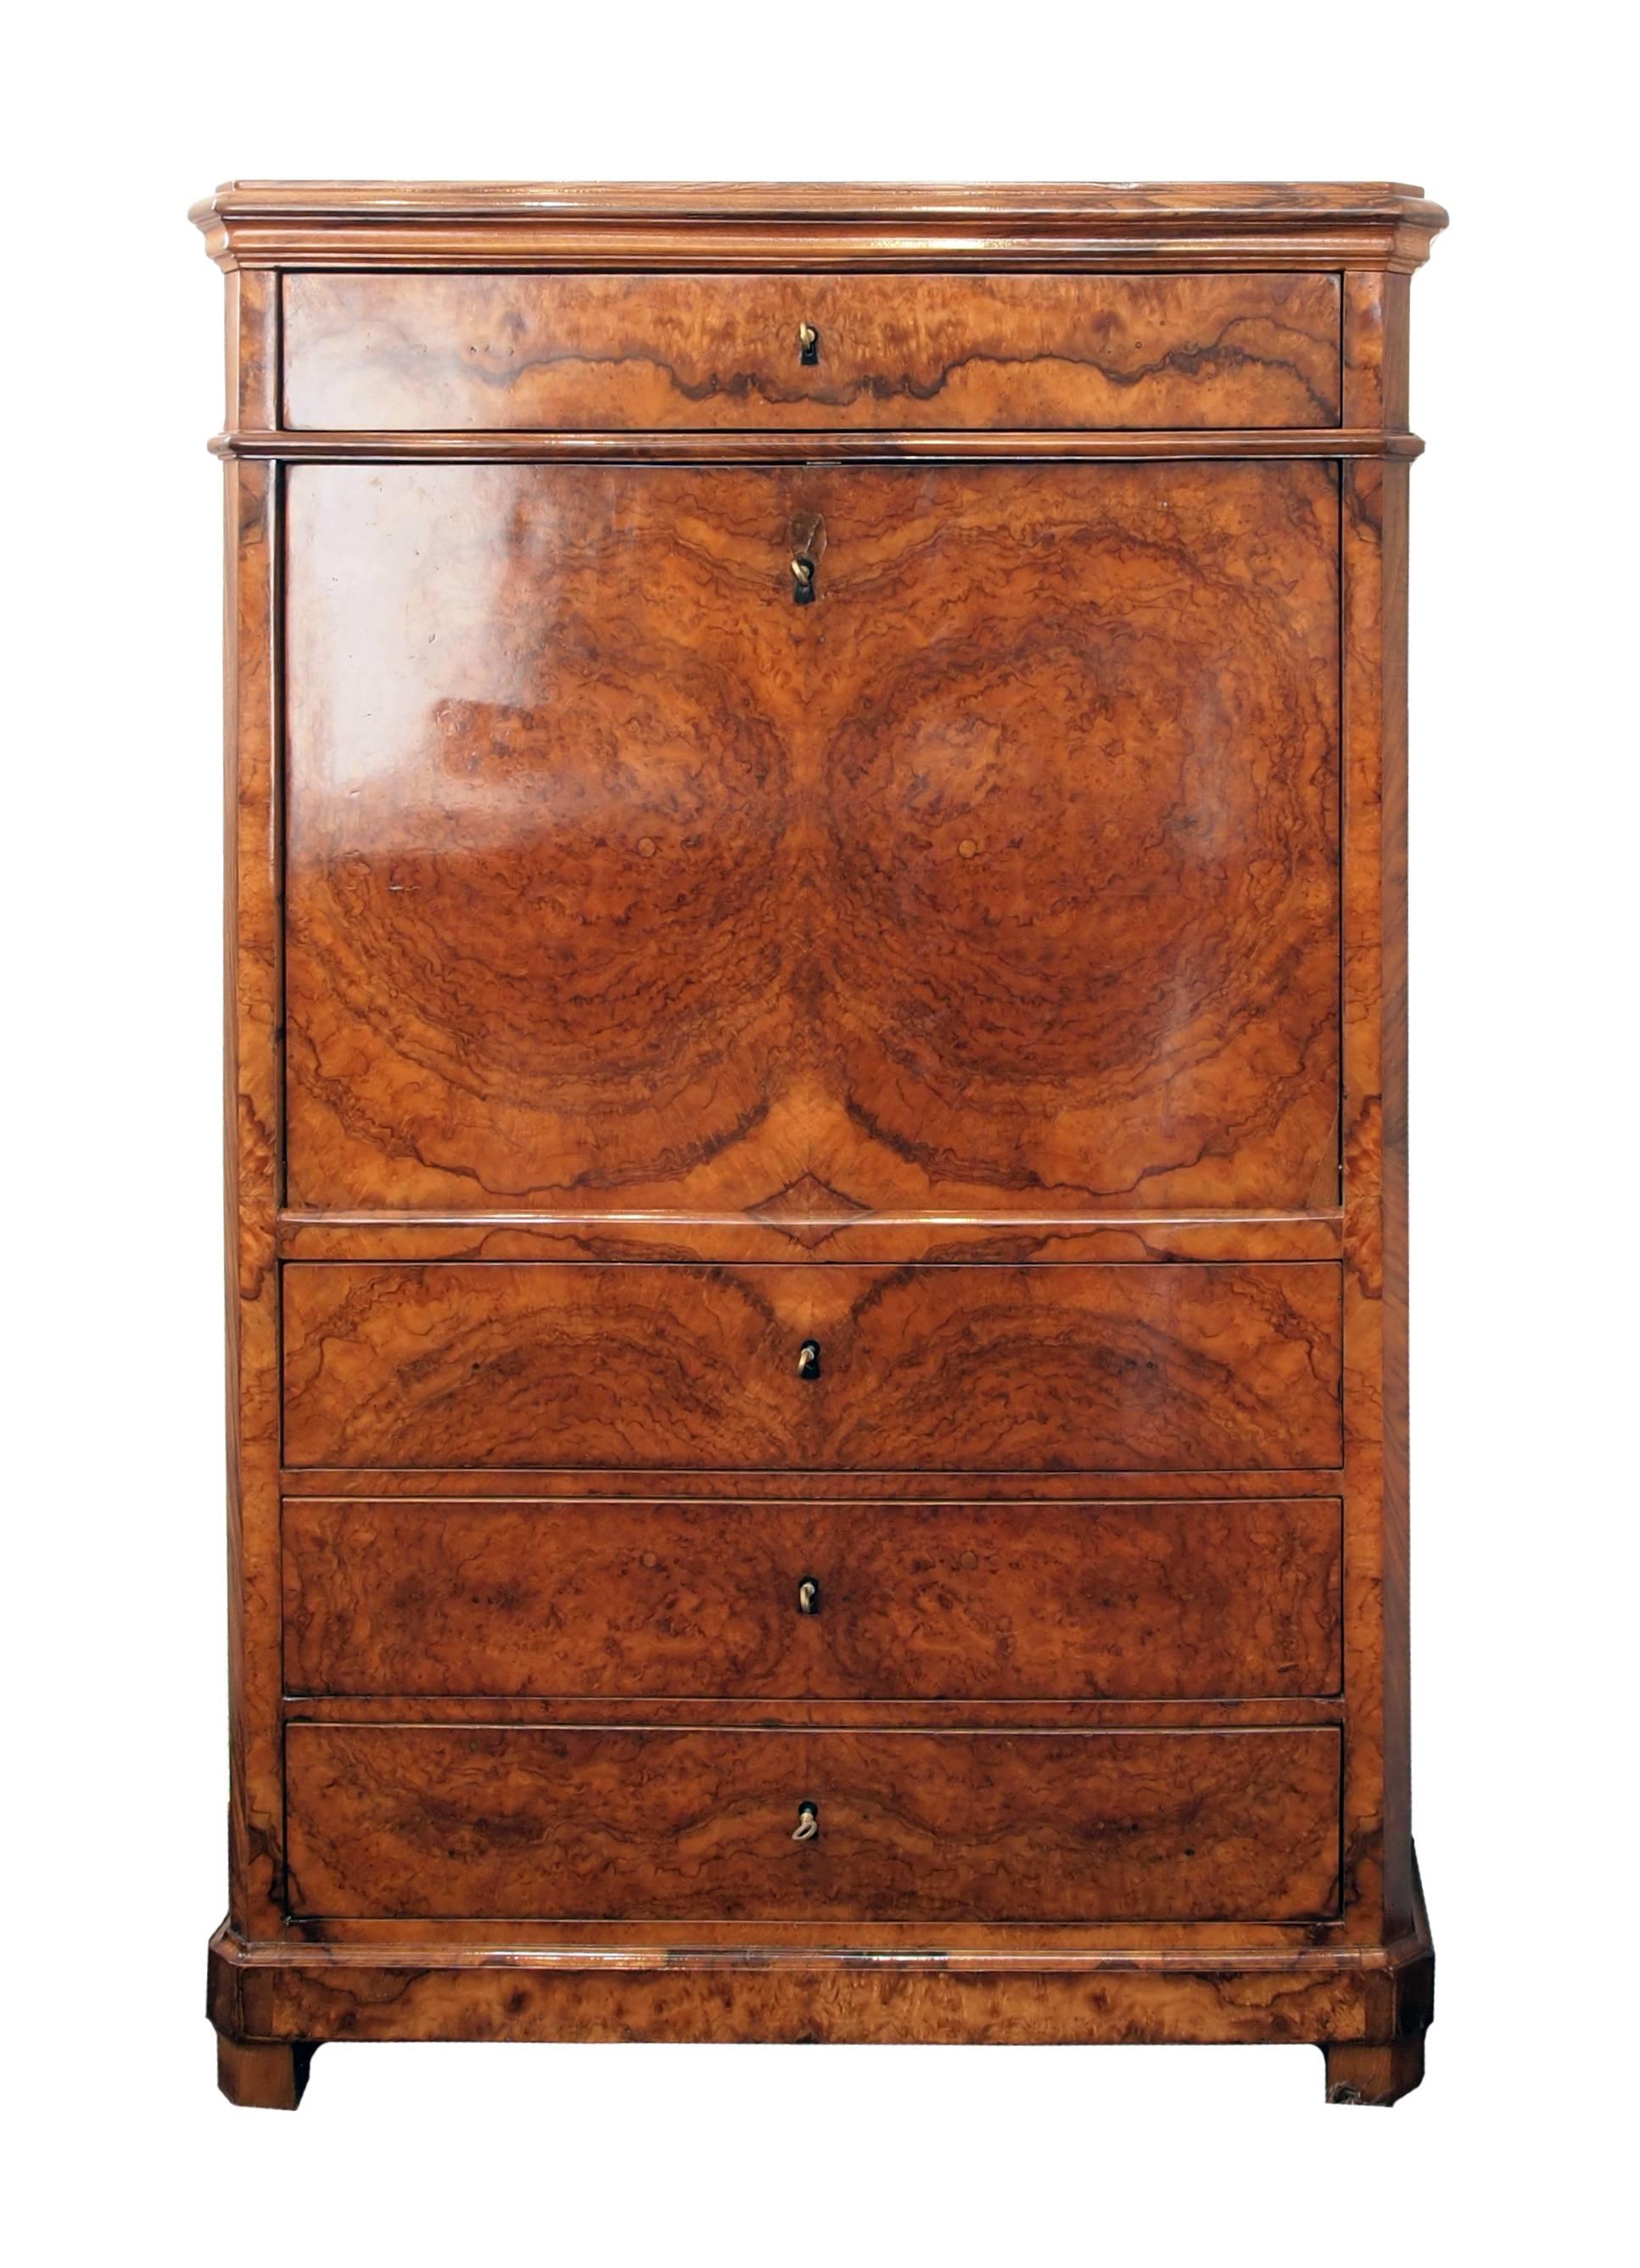 A beautiful secretary made of walnut veneer on a pine wood body, from the time of the Biedermeier.
The interior of the secretary is made of bird’s-eyes maple. In very good restored condition.
Measure: Writing height 74 cm.